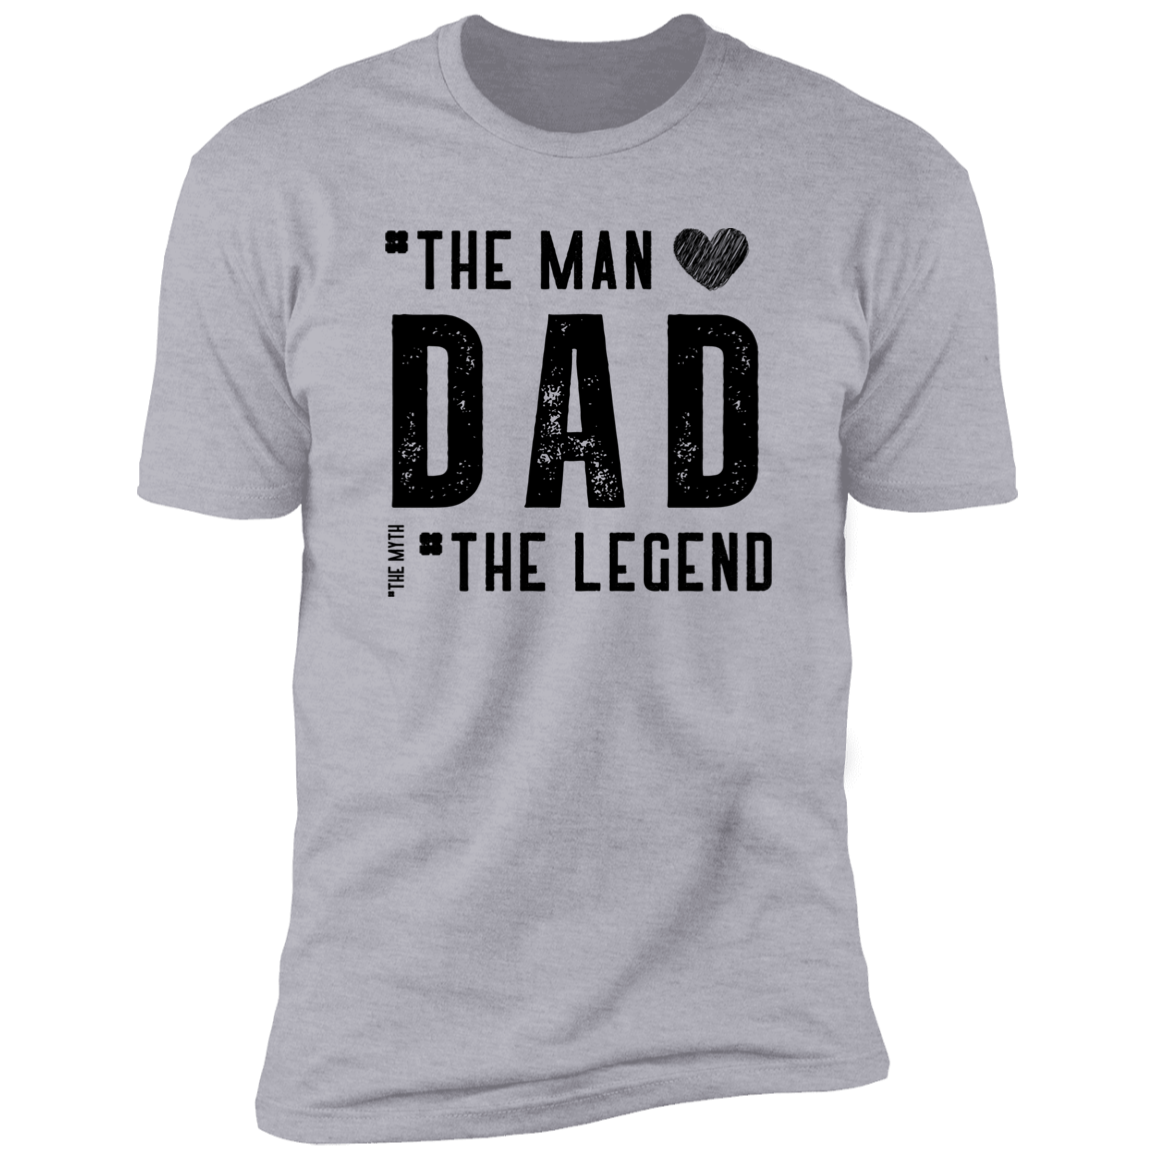 The Man, Dad, The Legend, the Myth! Tee